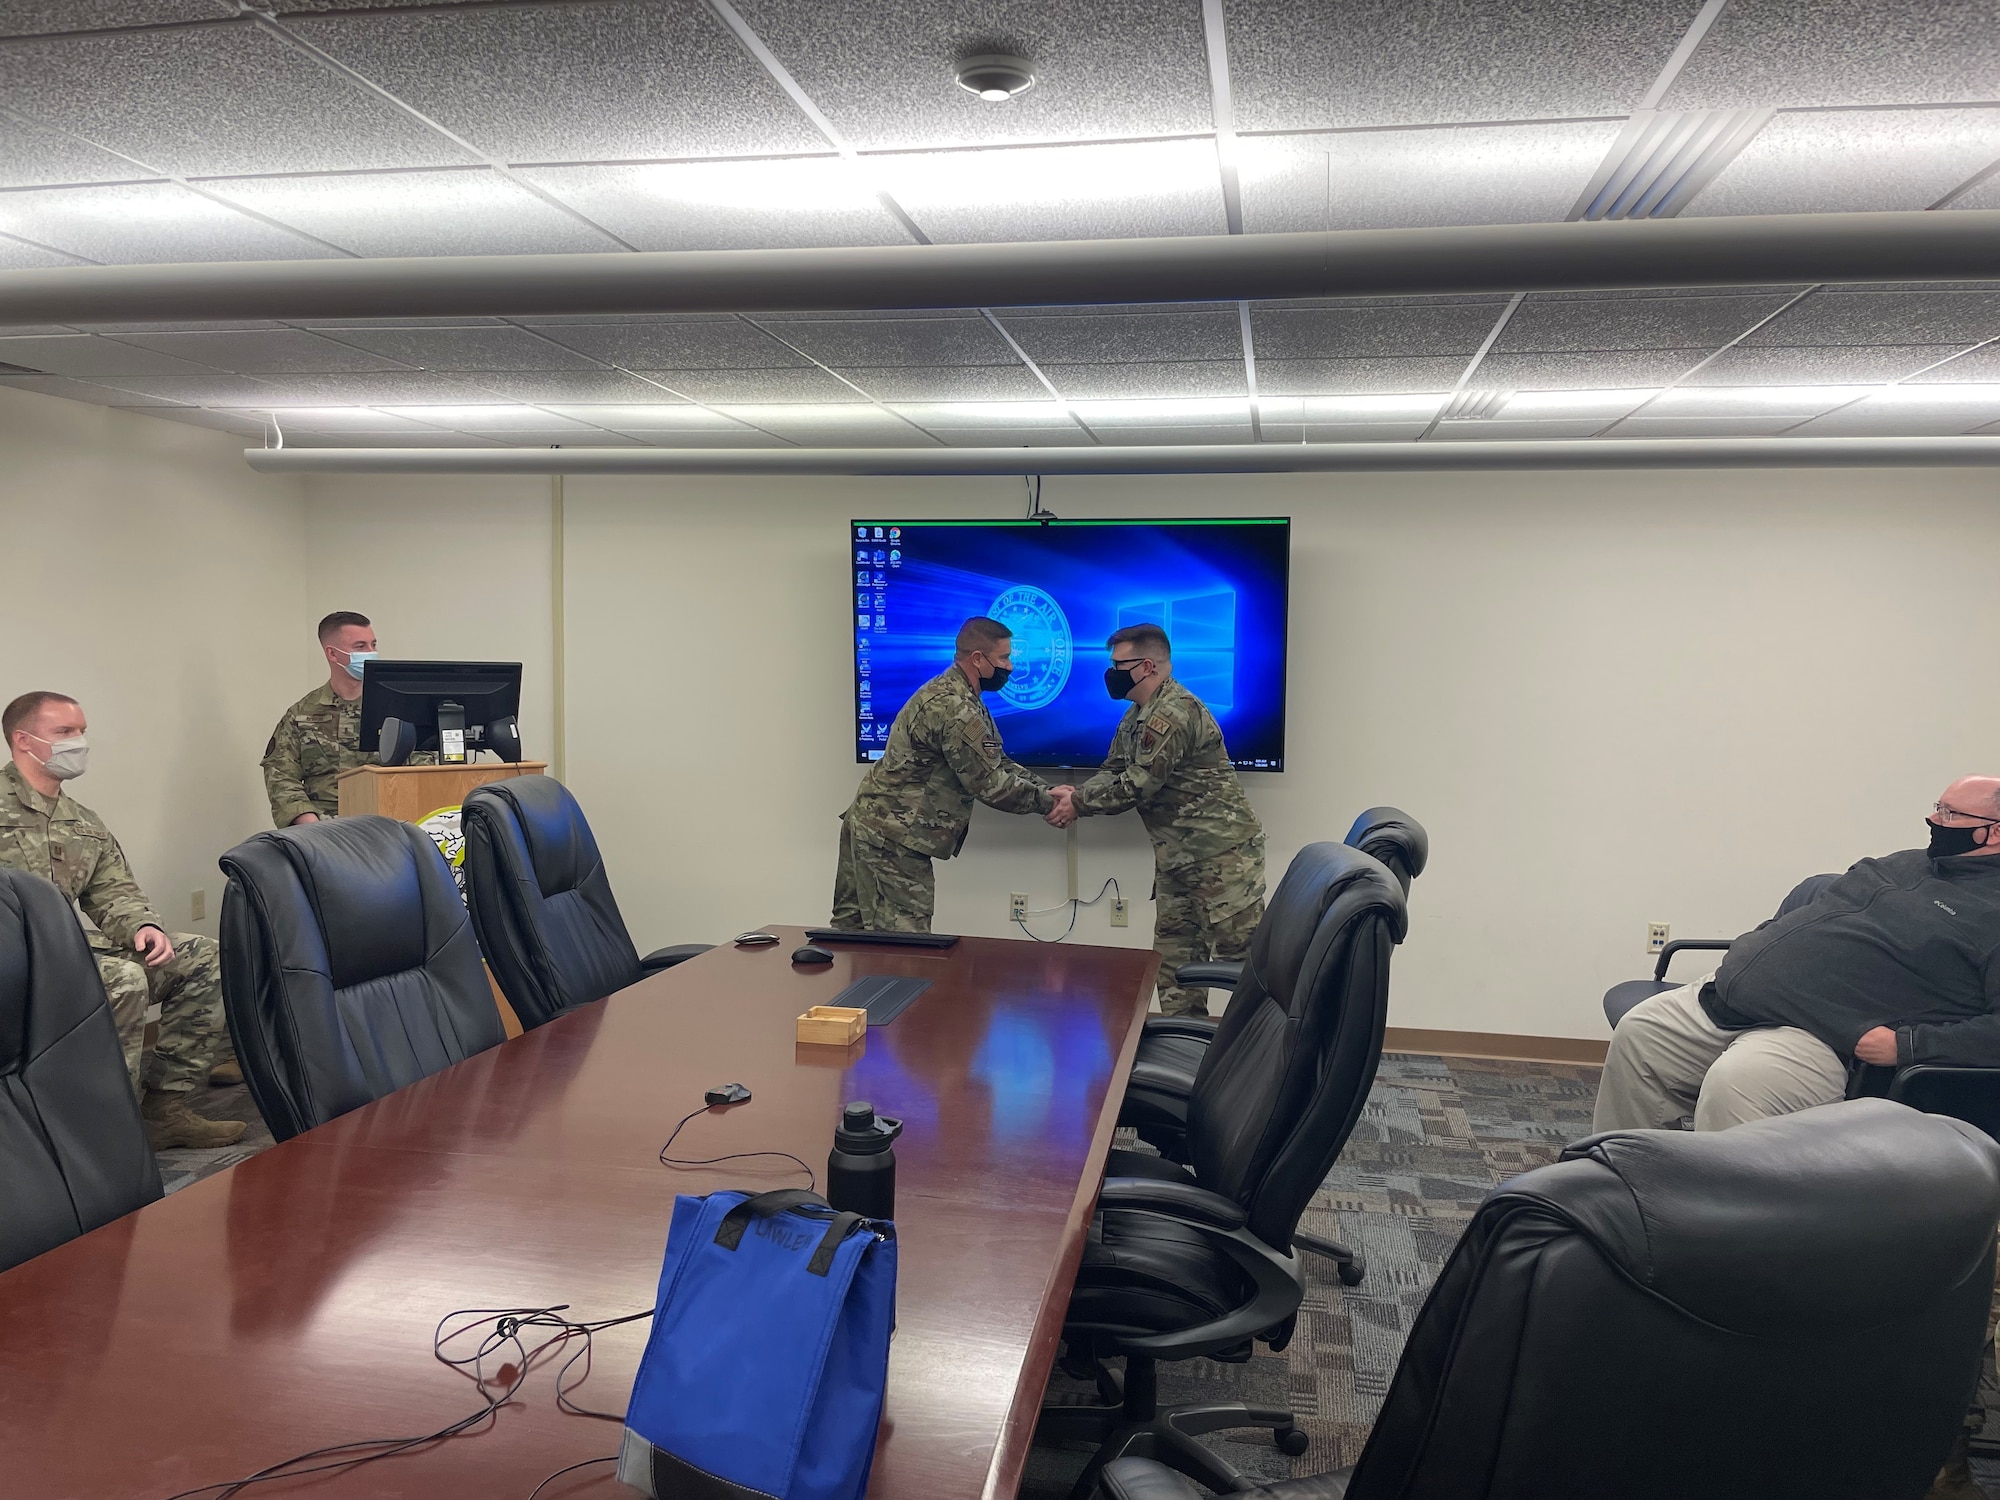 (Left to Right) Maj. Ricardo Cisneros (left), 18th Combat Weather Squadron Det. 4 commander, recognizes Staff Sgt. Jacob Lawler (right) from the 15th Operational Weather Squadron was recently recognized for his support during a ceremony on Jan. 26. (Courtesy Photo)